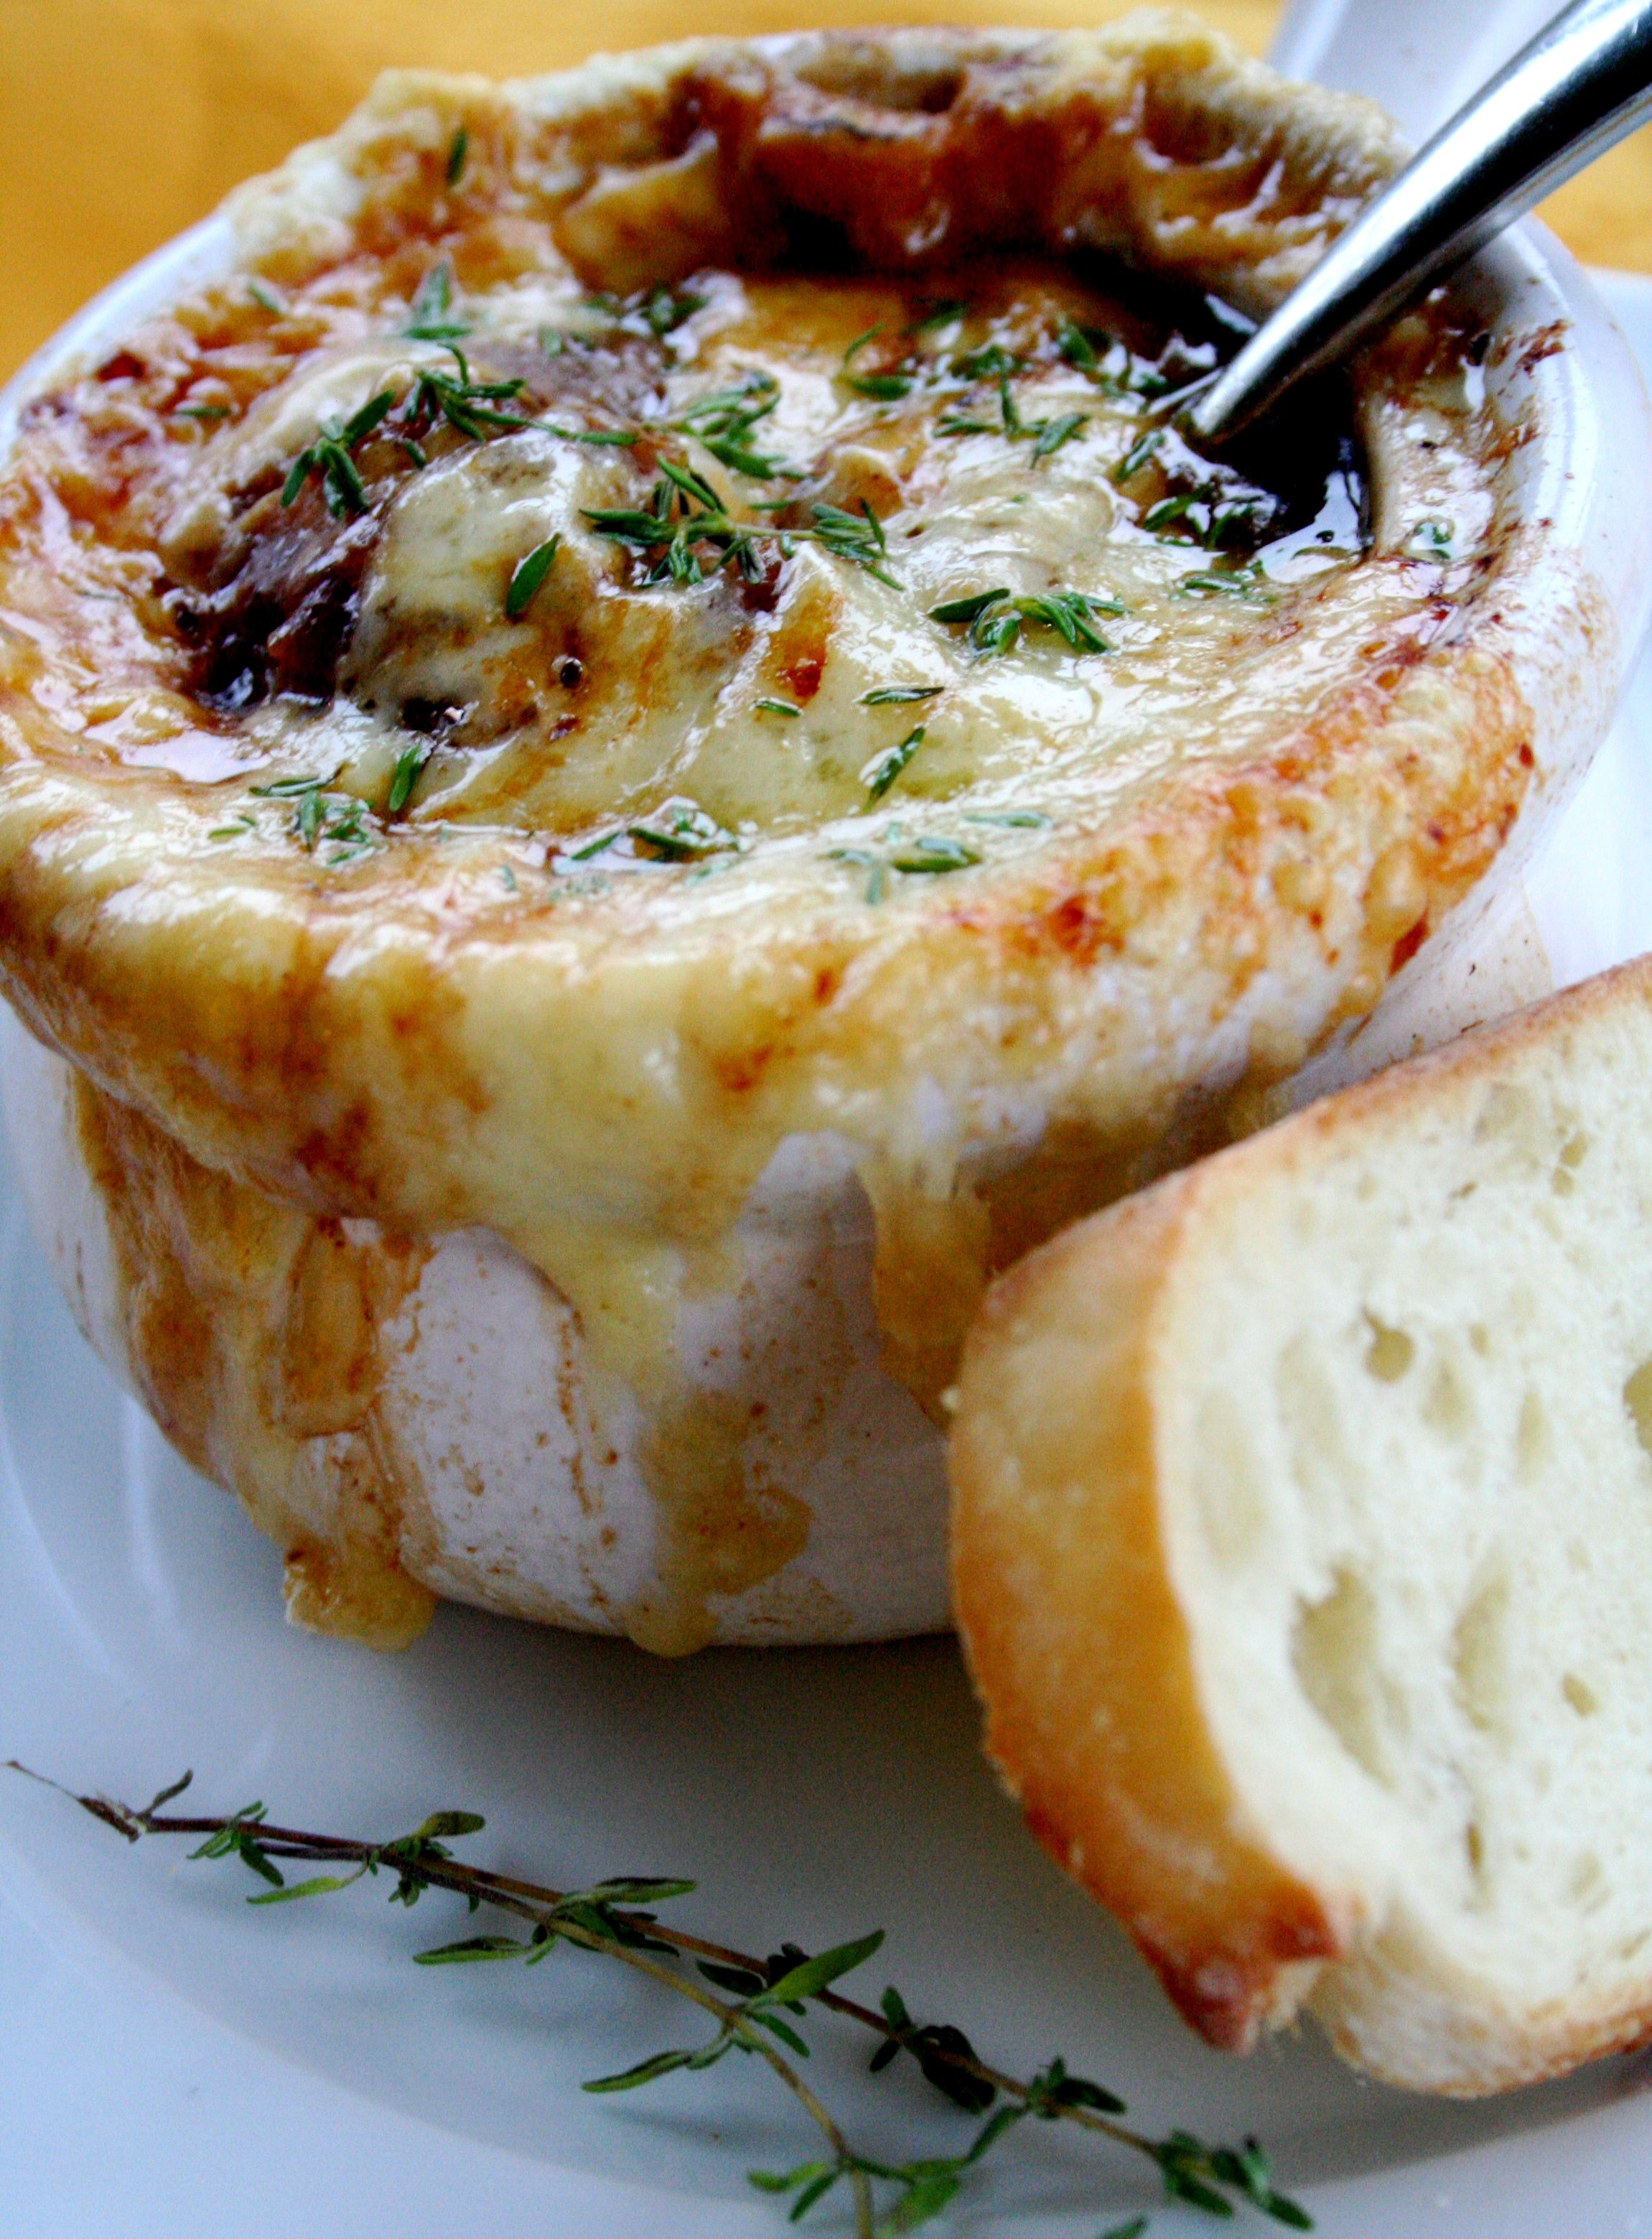 Vegetarian French Onion Soup – This is top of my recipe list right now